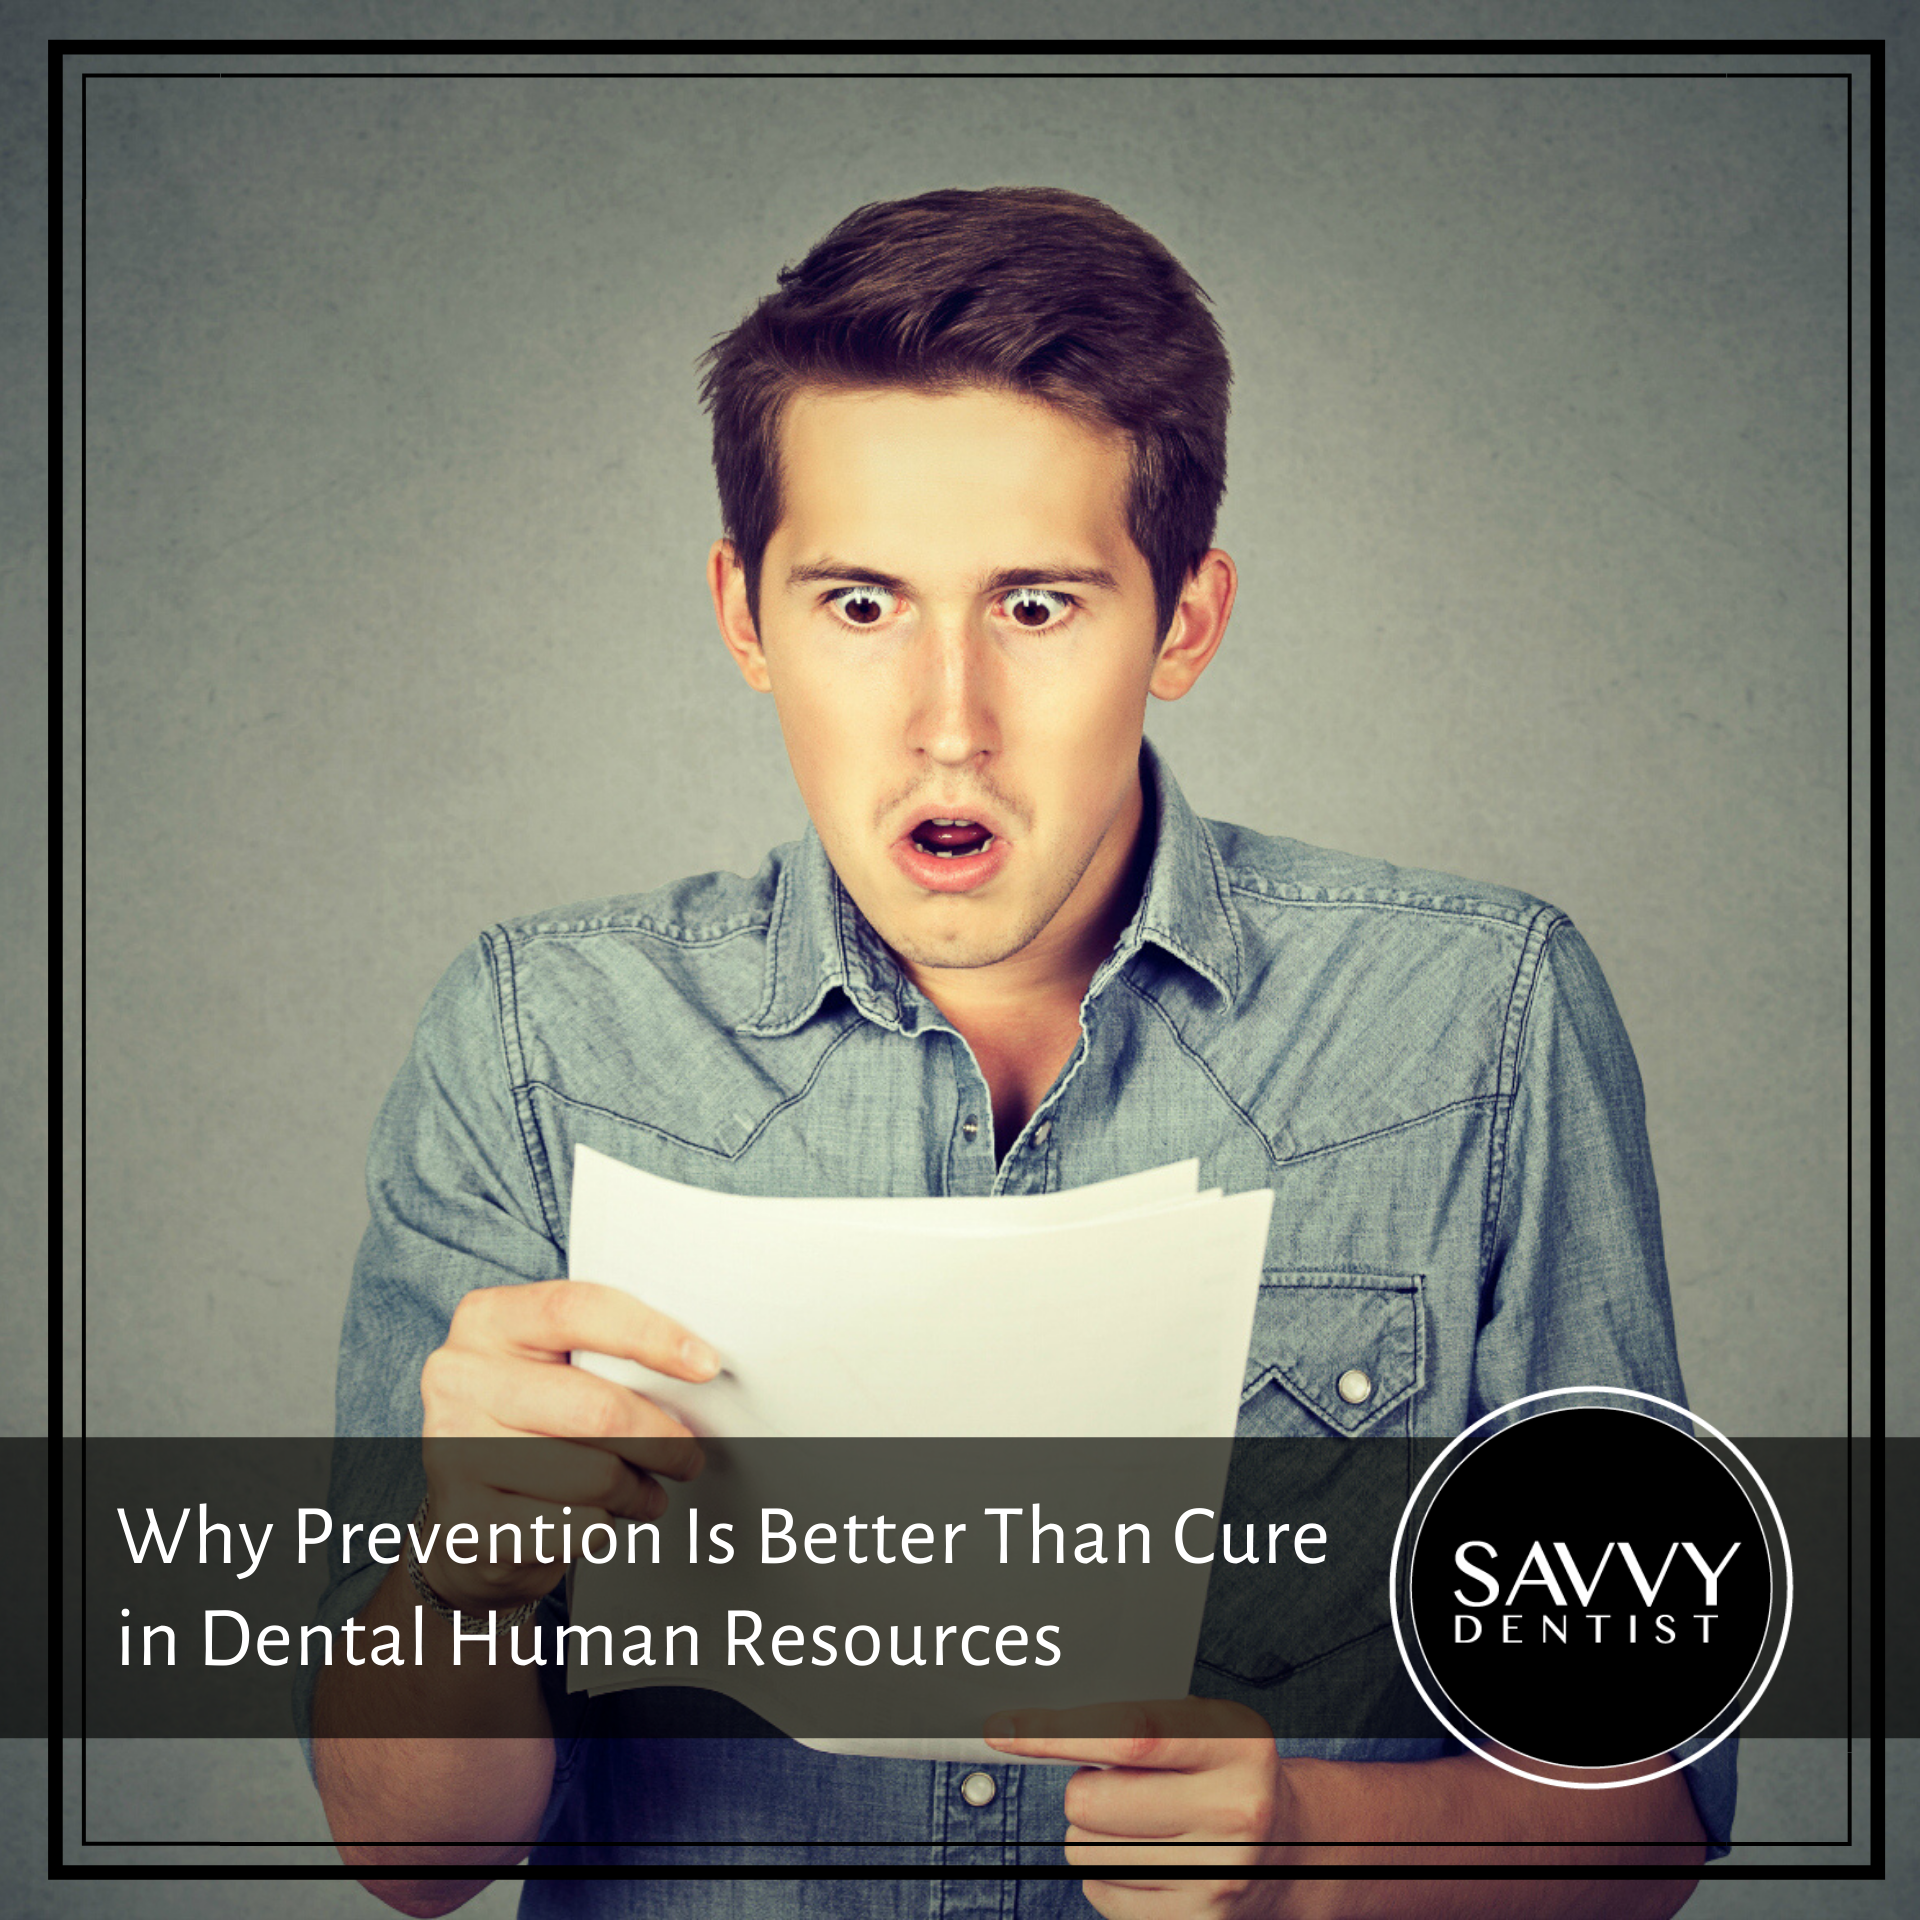 Why Prevention Is Better Than Cure in Dental Human Resources